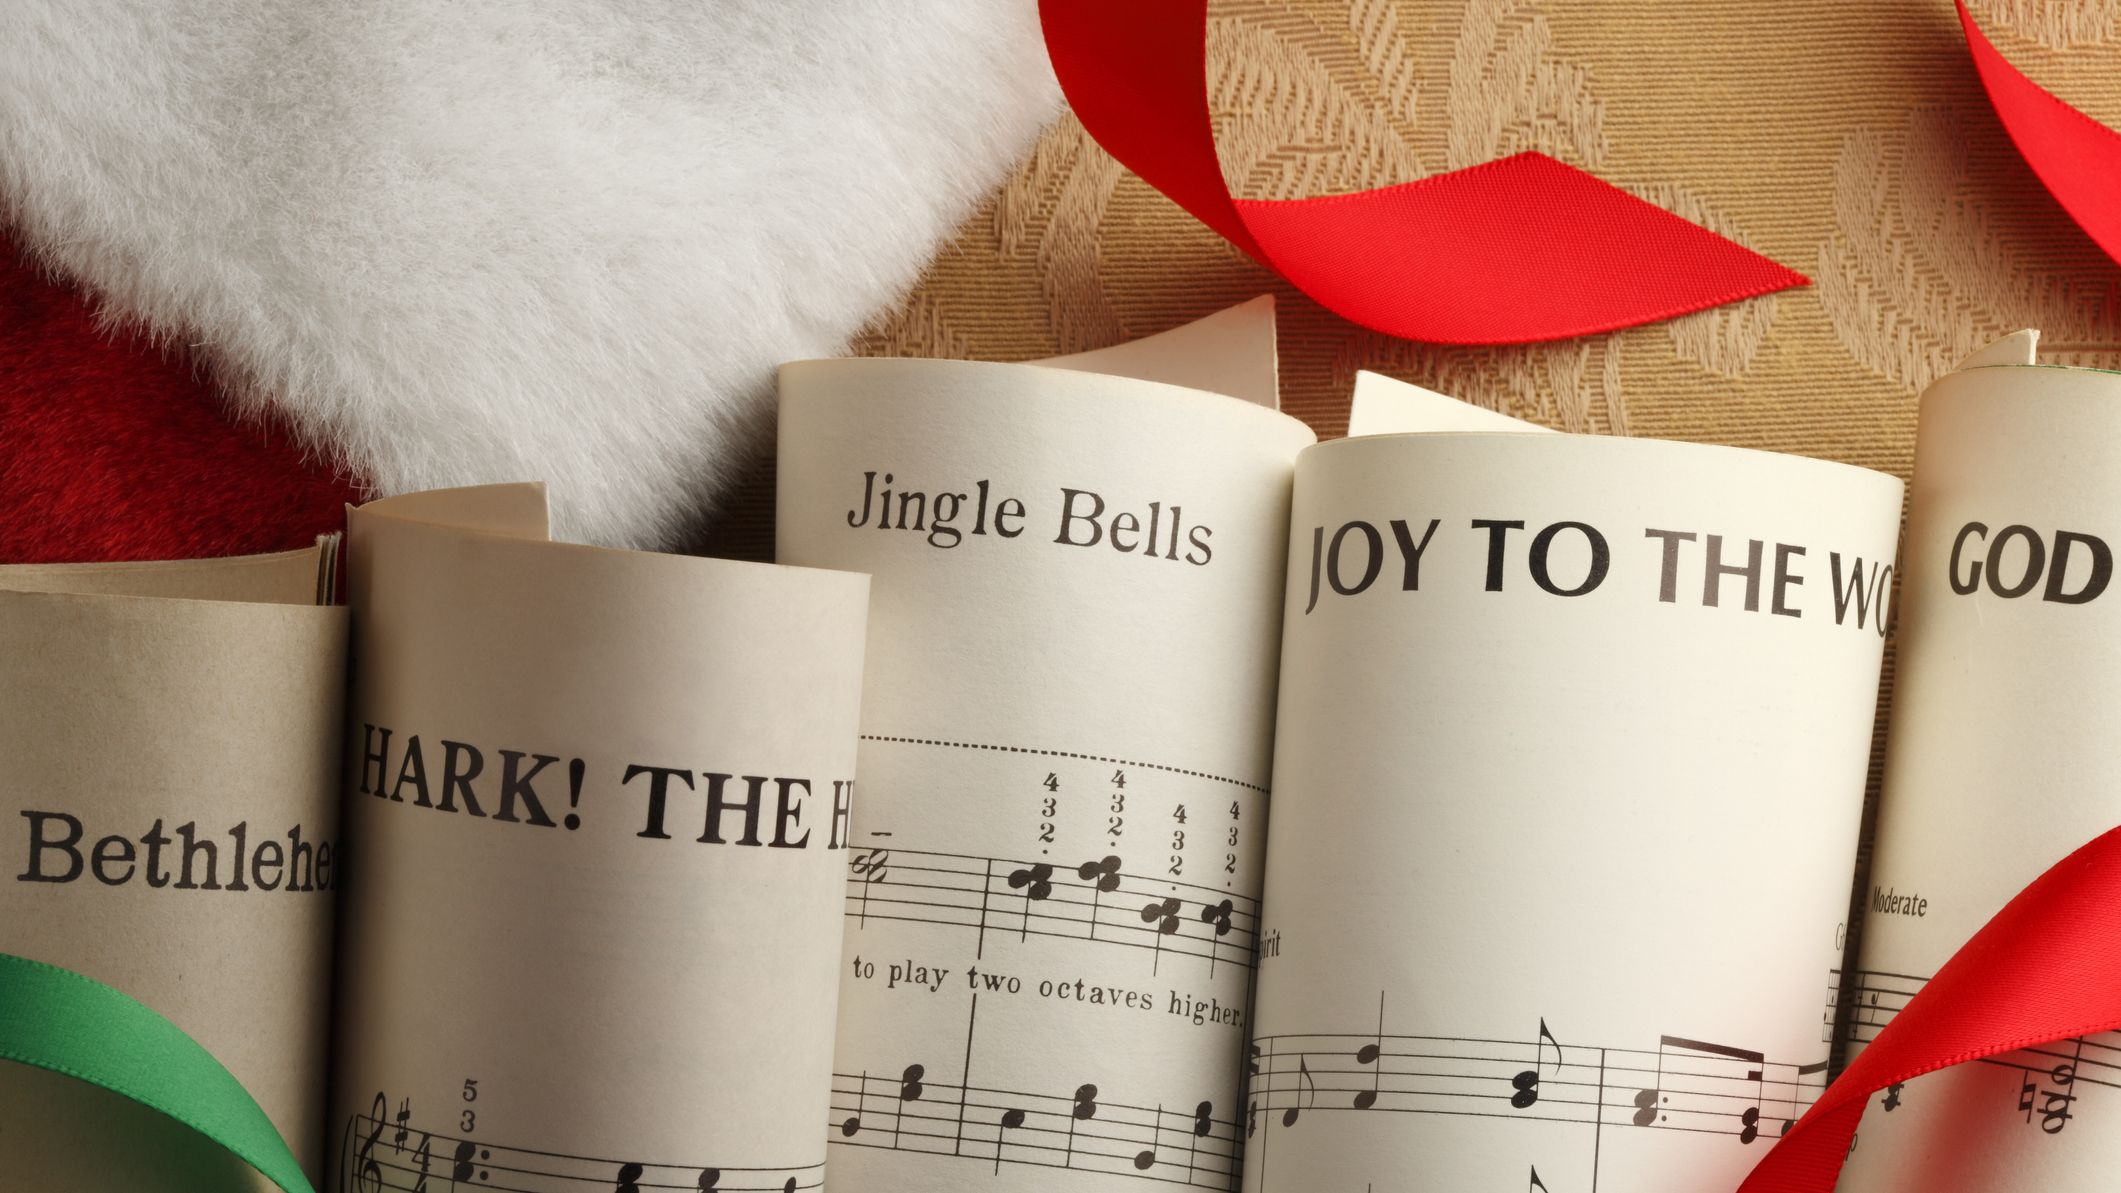 27 Best Religious Christmas Songs to Spread Holiday Joy